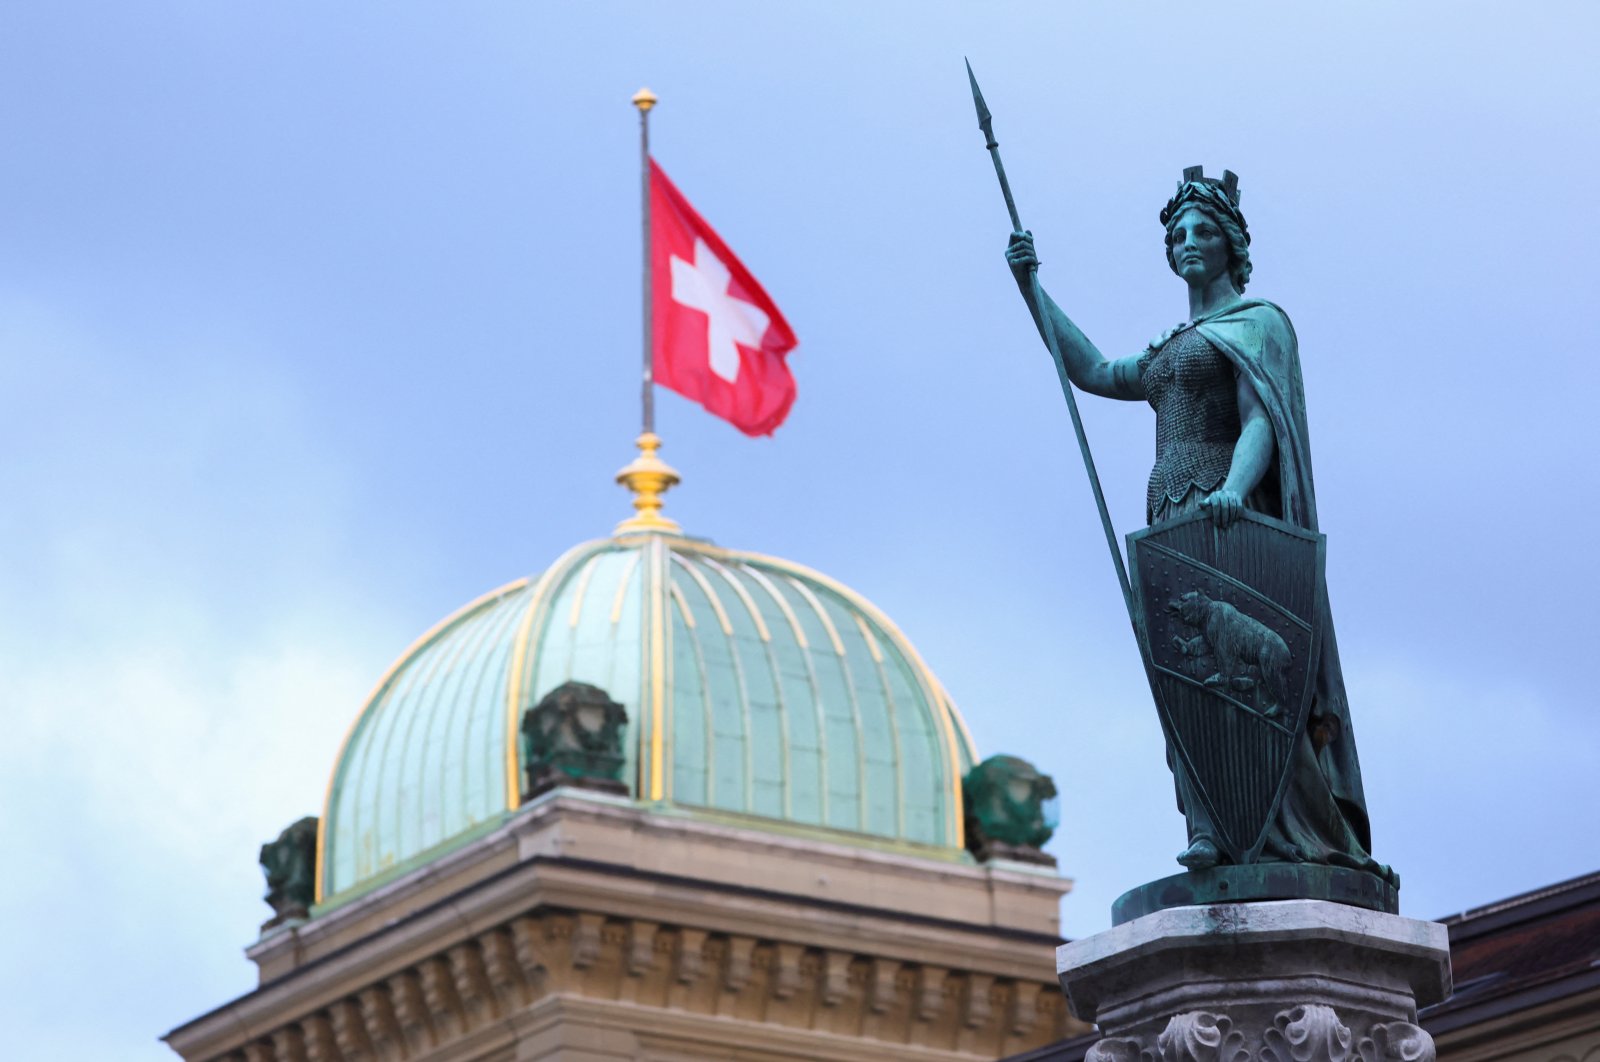 The Helvetia statue is pictured in front of the Swiss Parliament Building, in Bern, Switzerland, March 19, 2023. (Reuters Photo)